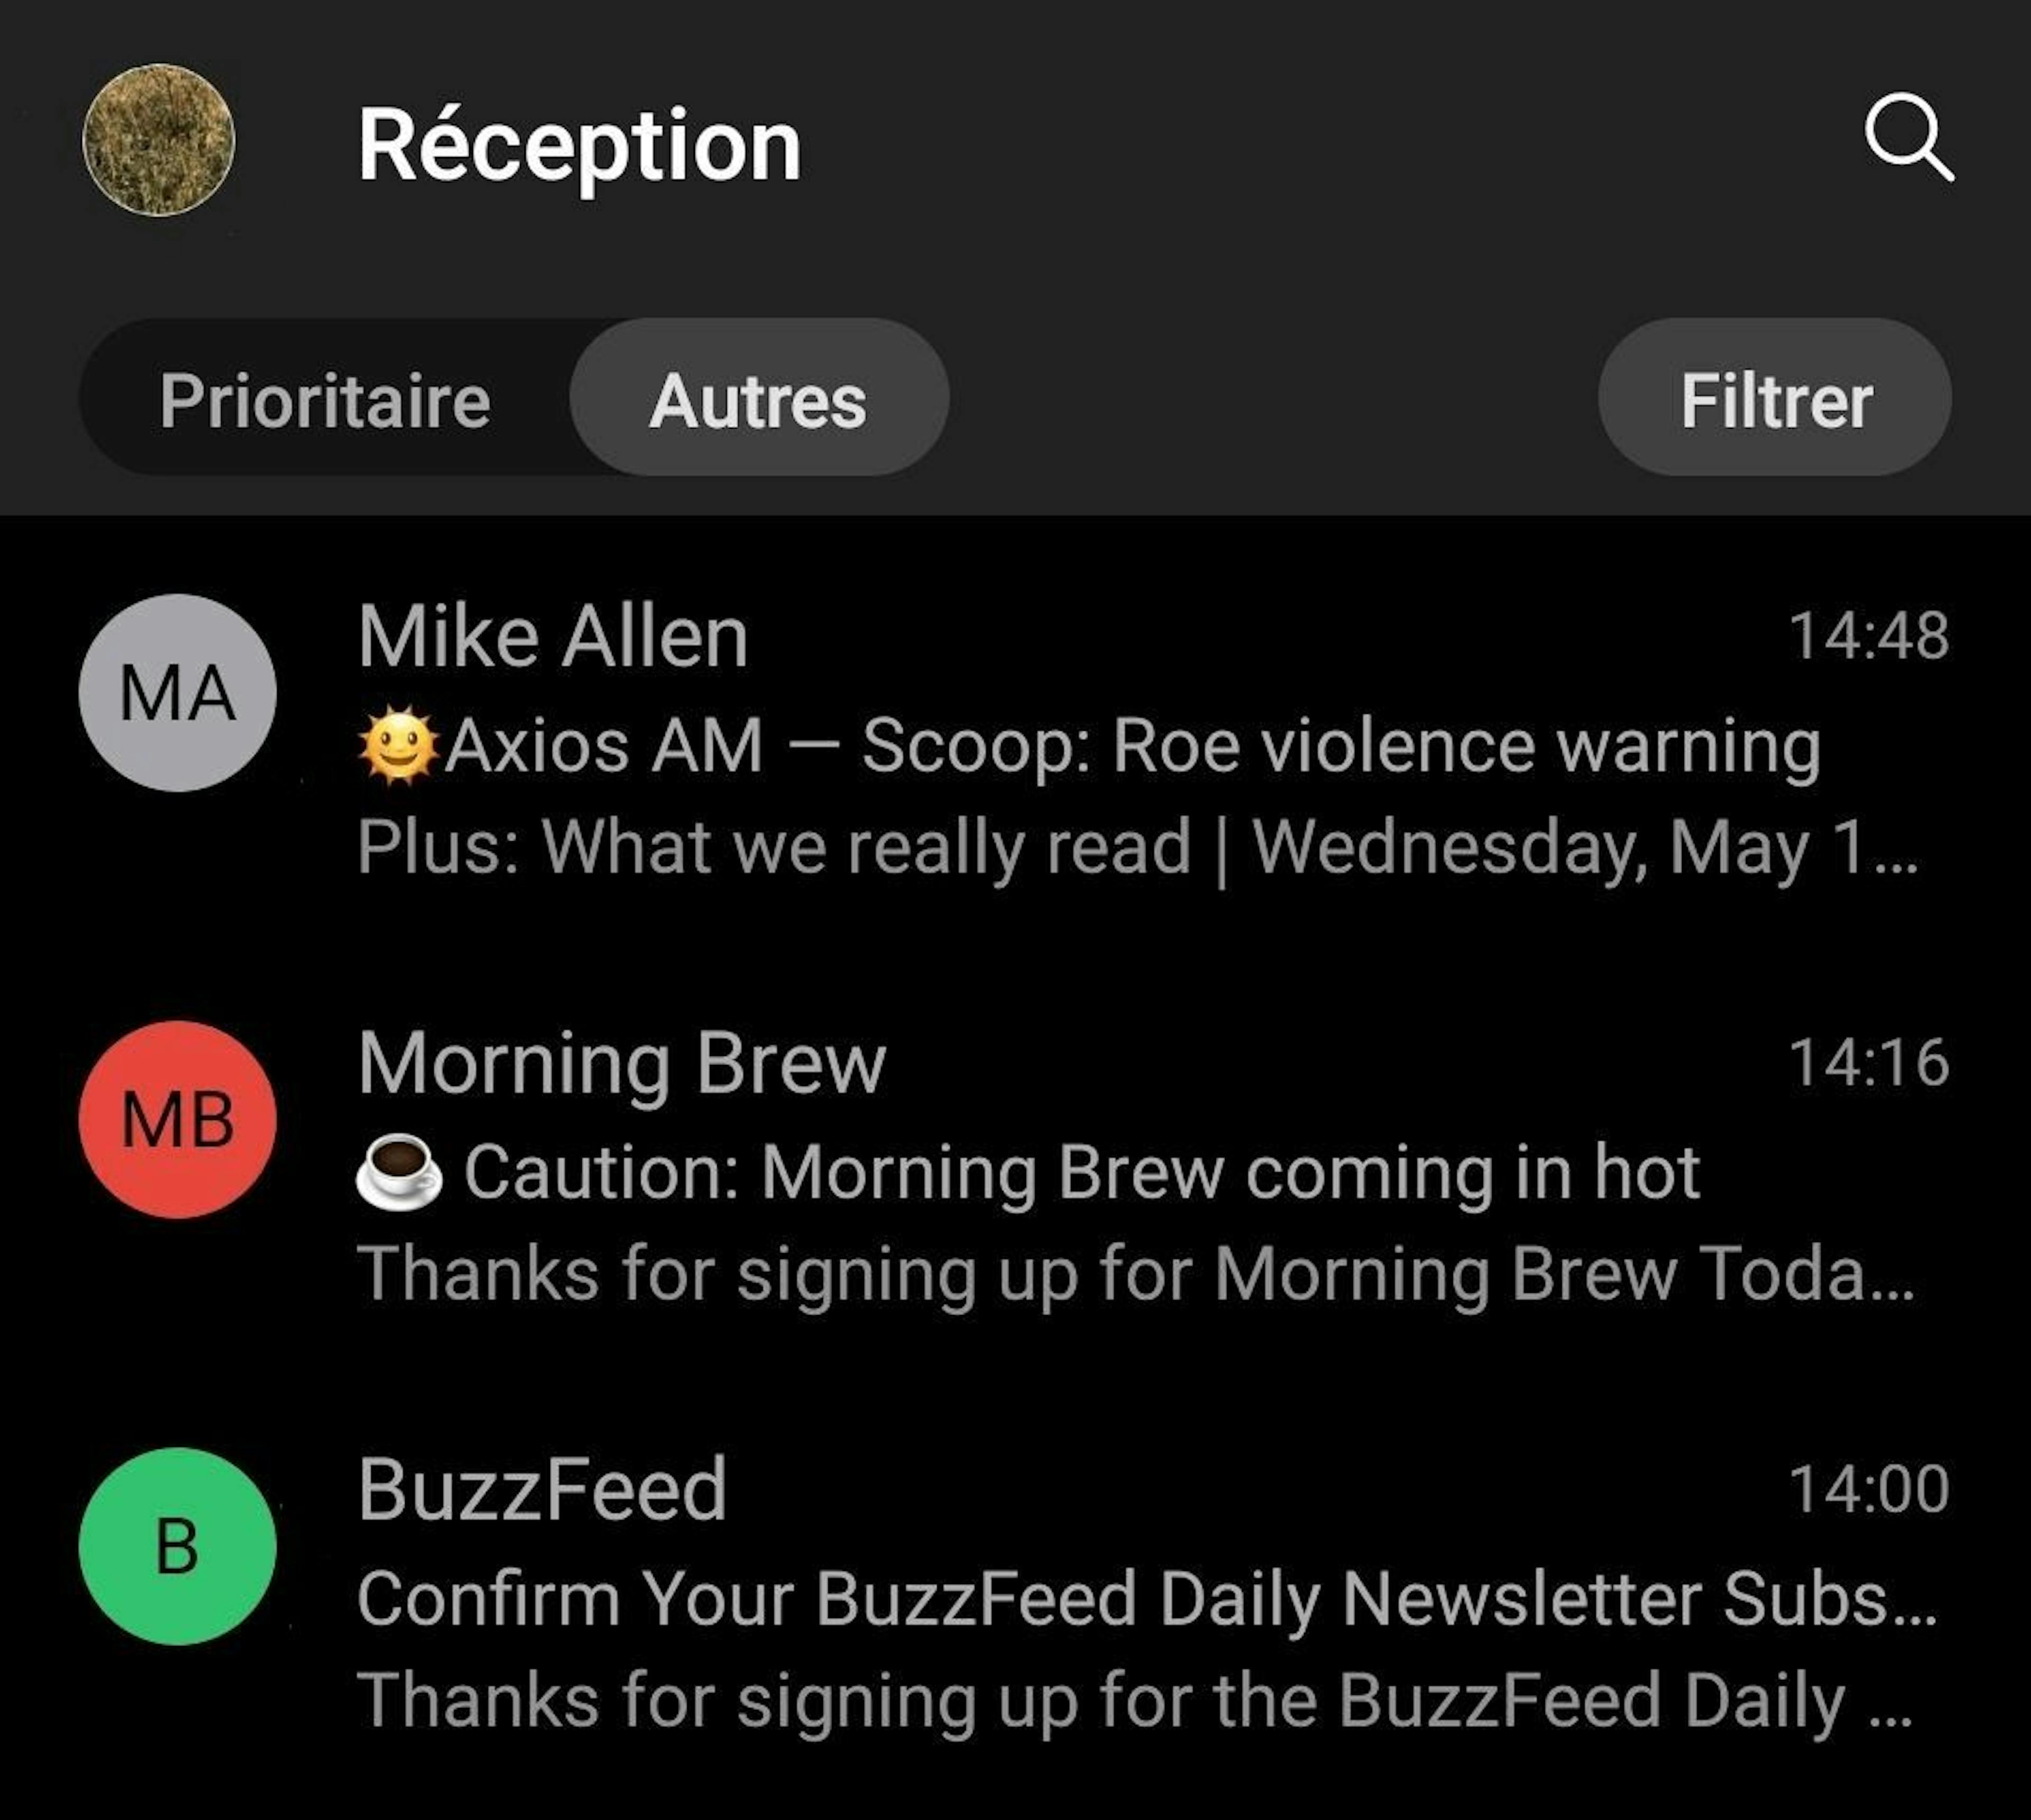 In Outlook, emails from Mike Allen, Morning Brew, and Buzzfeed are displayed with auto-generated avatars despite having custom avatars in other email clients.